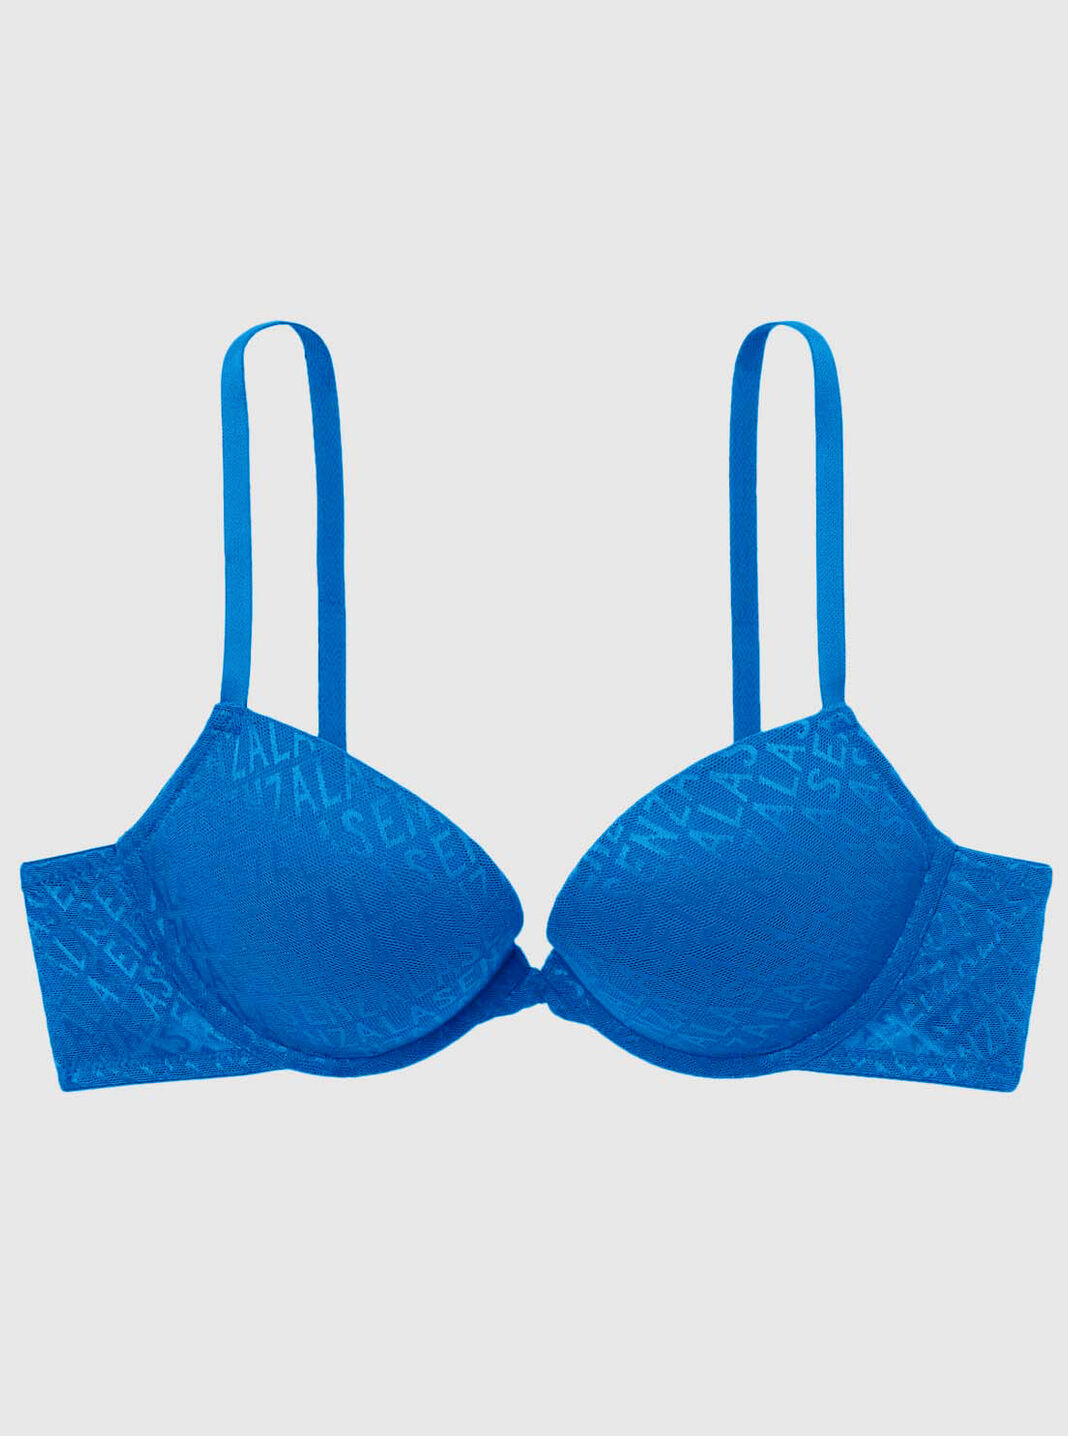 Red Cotton Blend Comfortable bra for sleeping Full Net at Rs 80